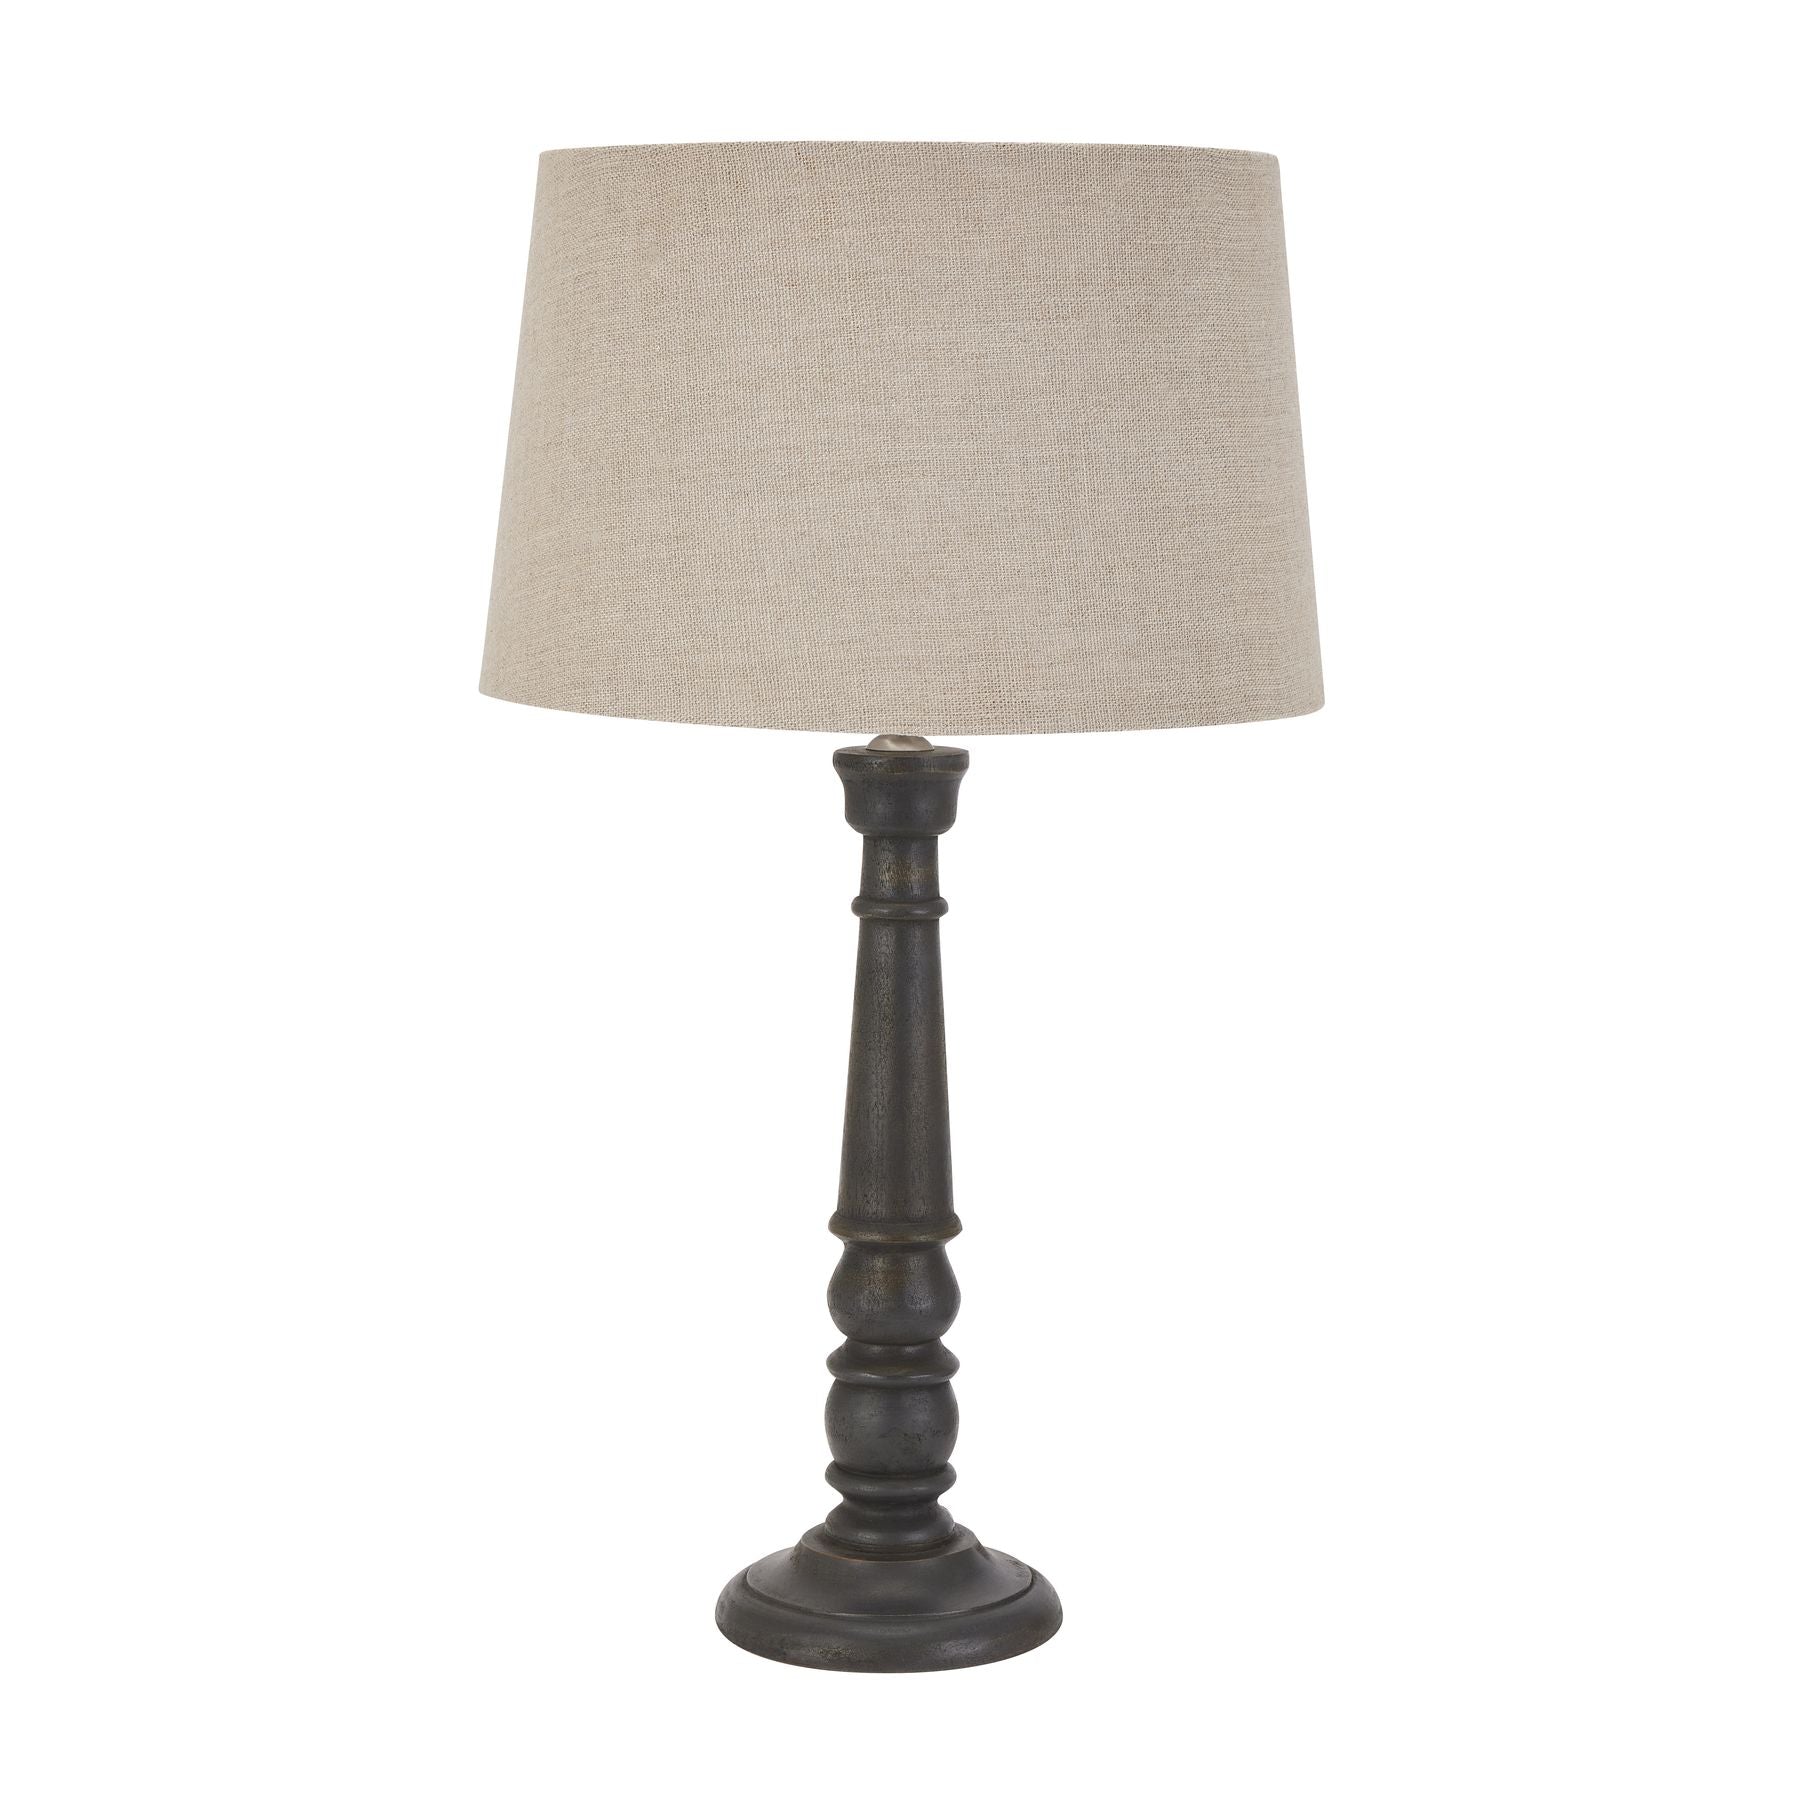 View Delaney Grey Bead Candlestick Lamp With Linen Shade information